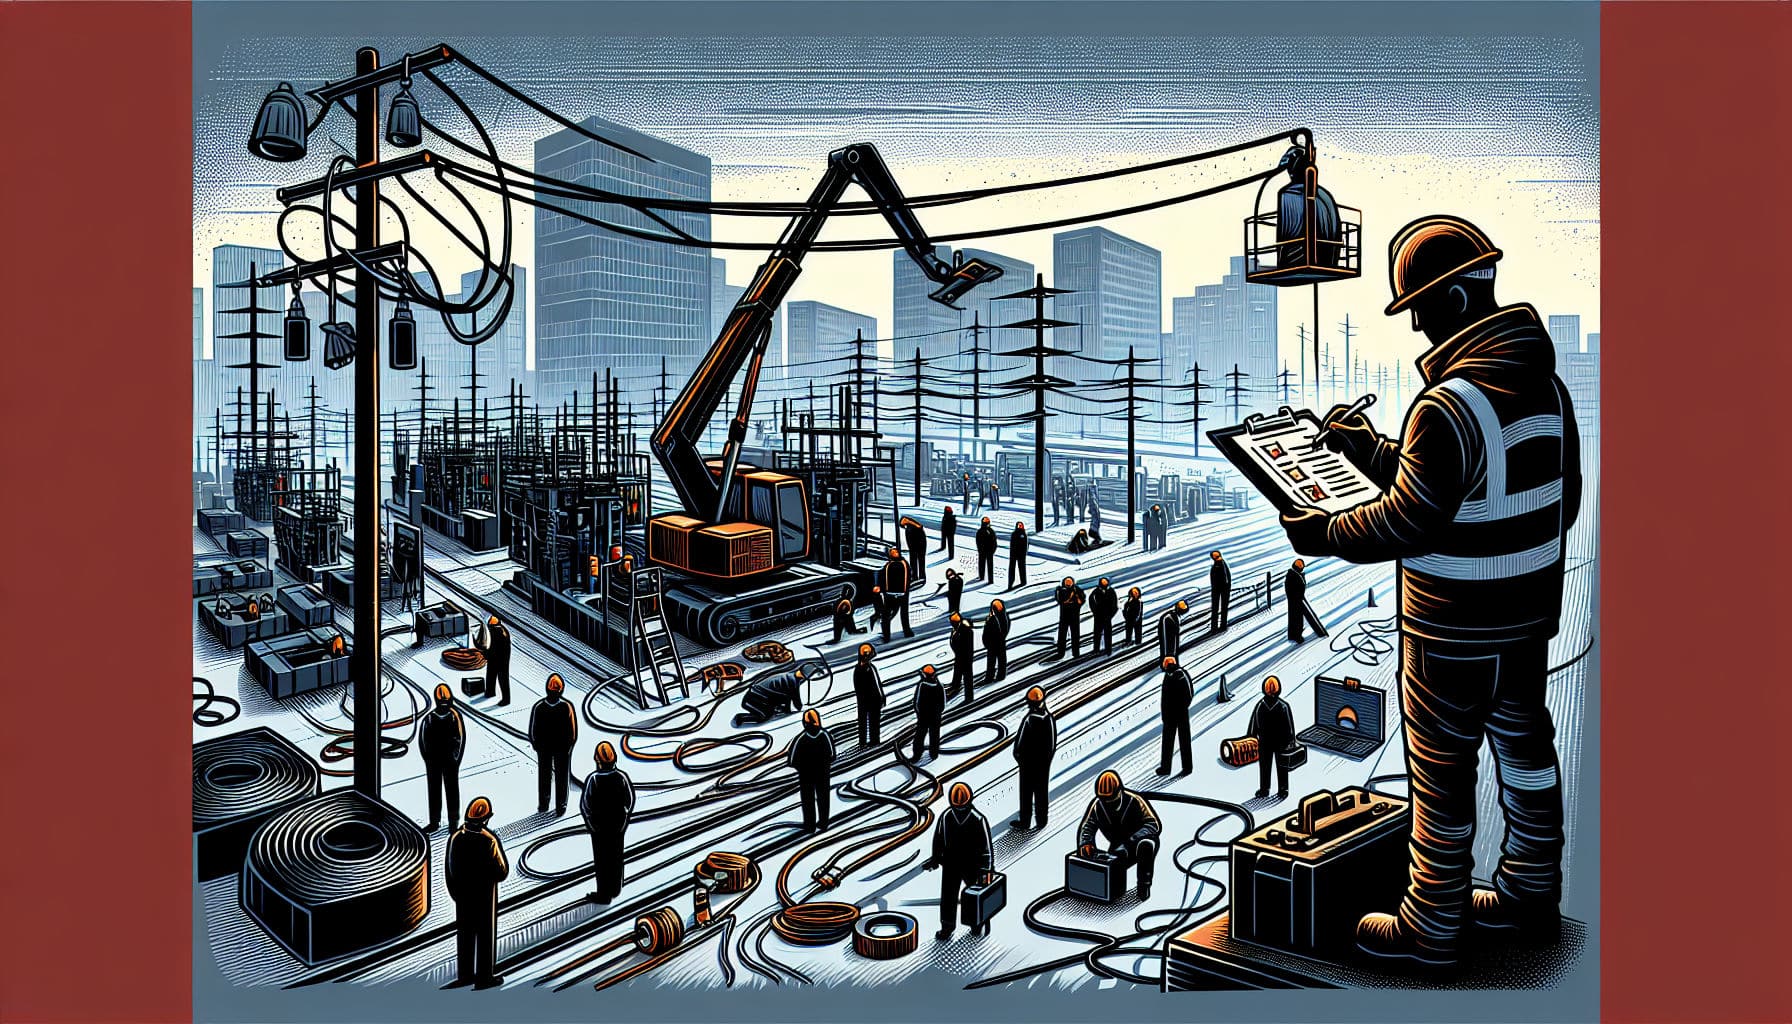 Illustration of workers following construction site rules for electrical safety